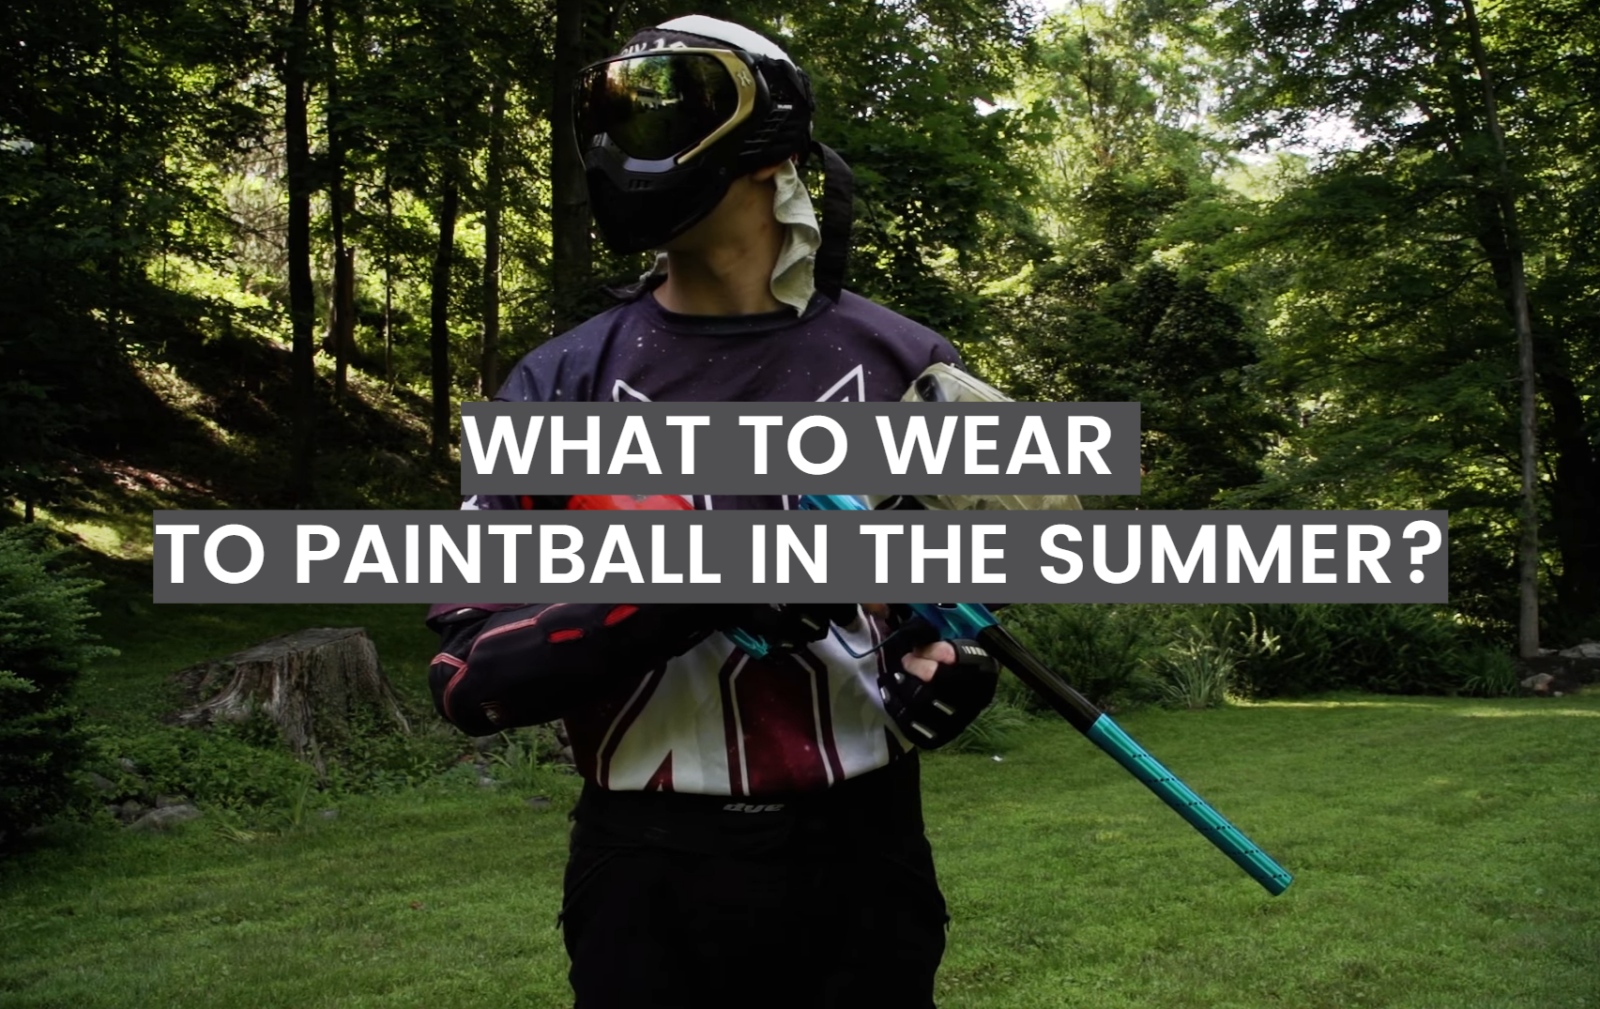 What to Wear to Paintball in the Summer?